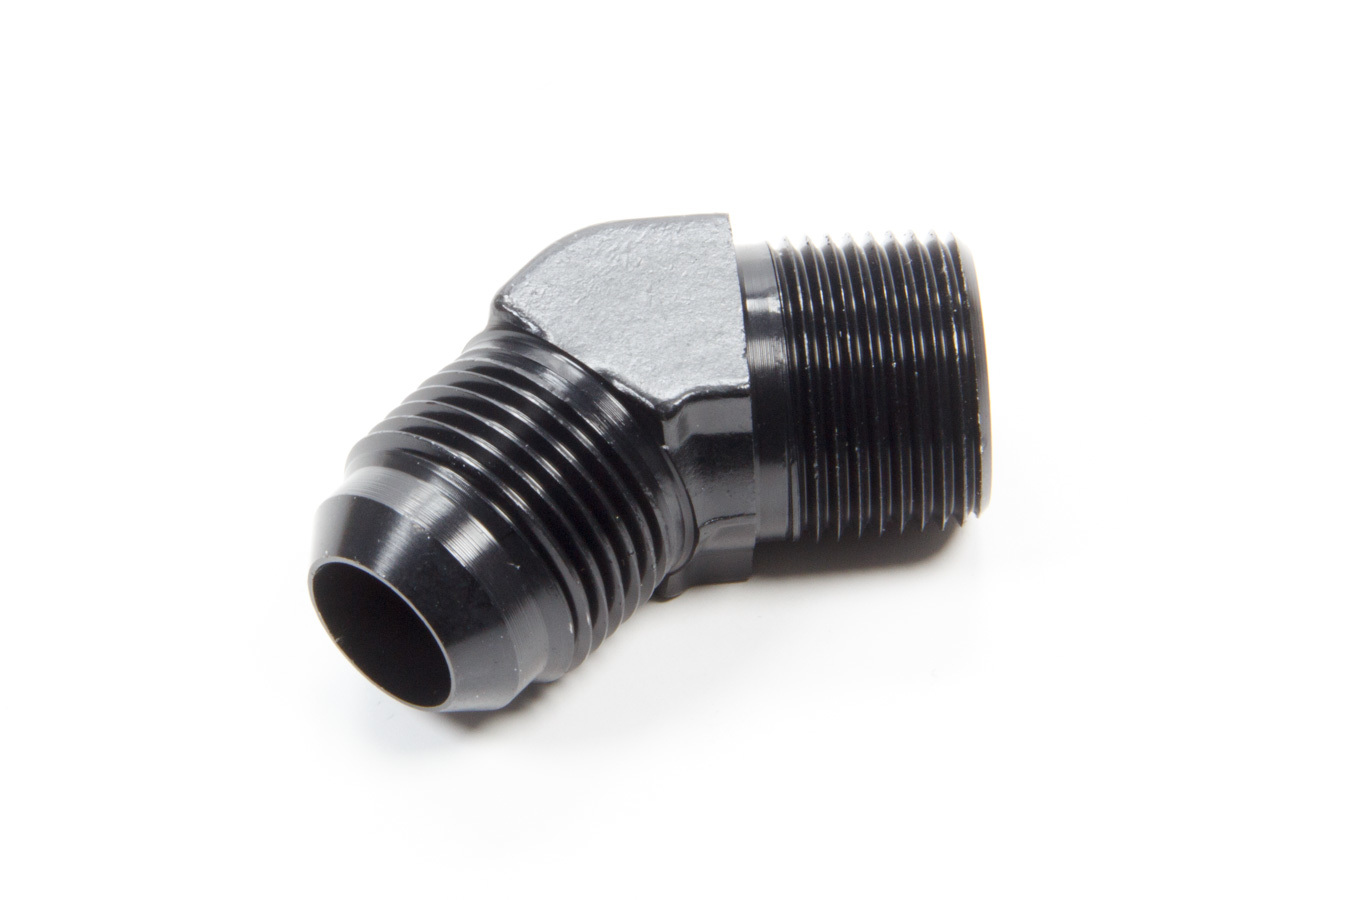 Aeroquip FCM5025 Fitting, Adapter, 45 Degree, 12 AN Male to 3/4 in NPT Male, Aluminum, Black Anodized, Each